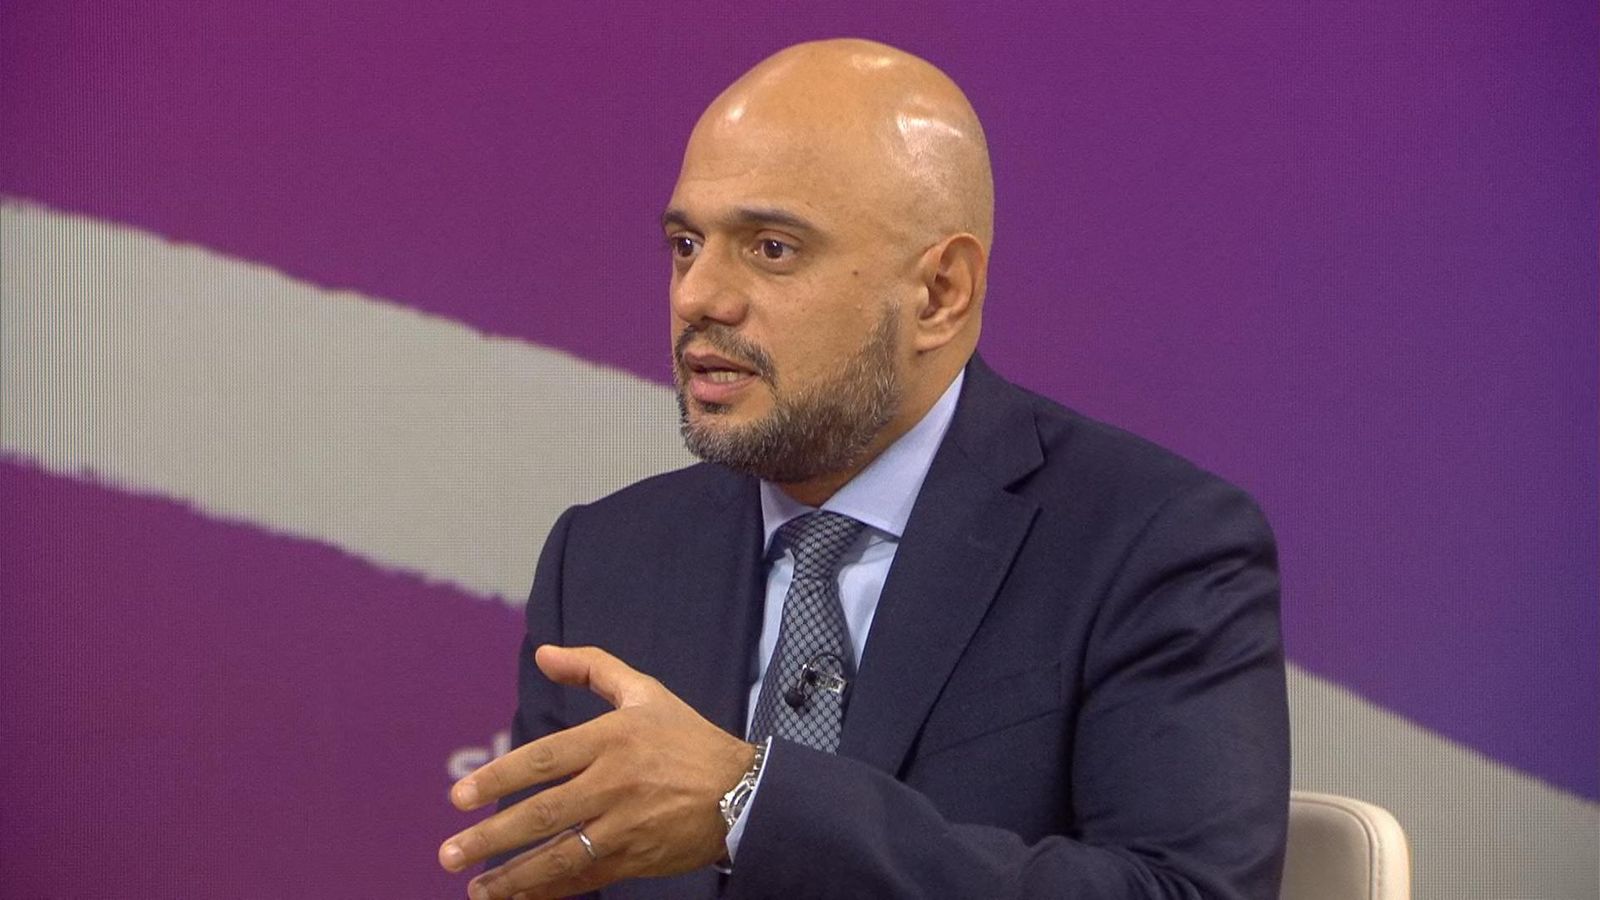 Sajid Javid: Ex-health secretary issues warning over NHS as he admits odds stacked against Tories at next election